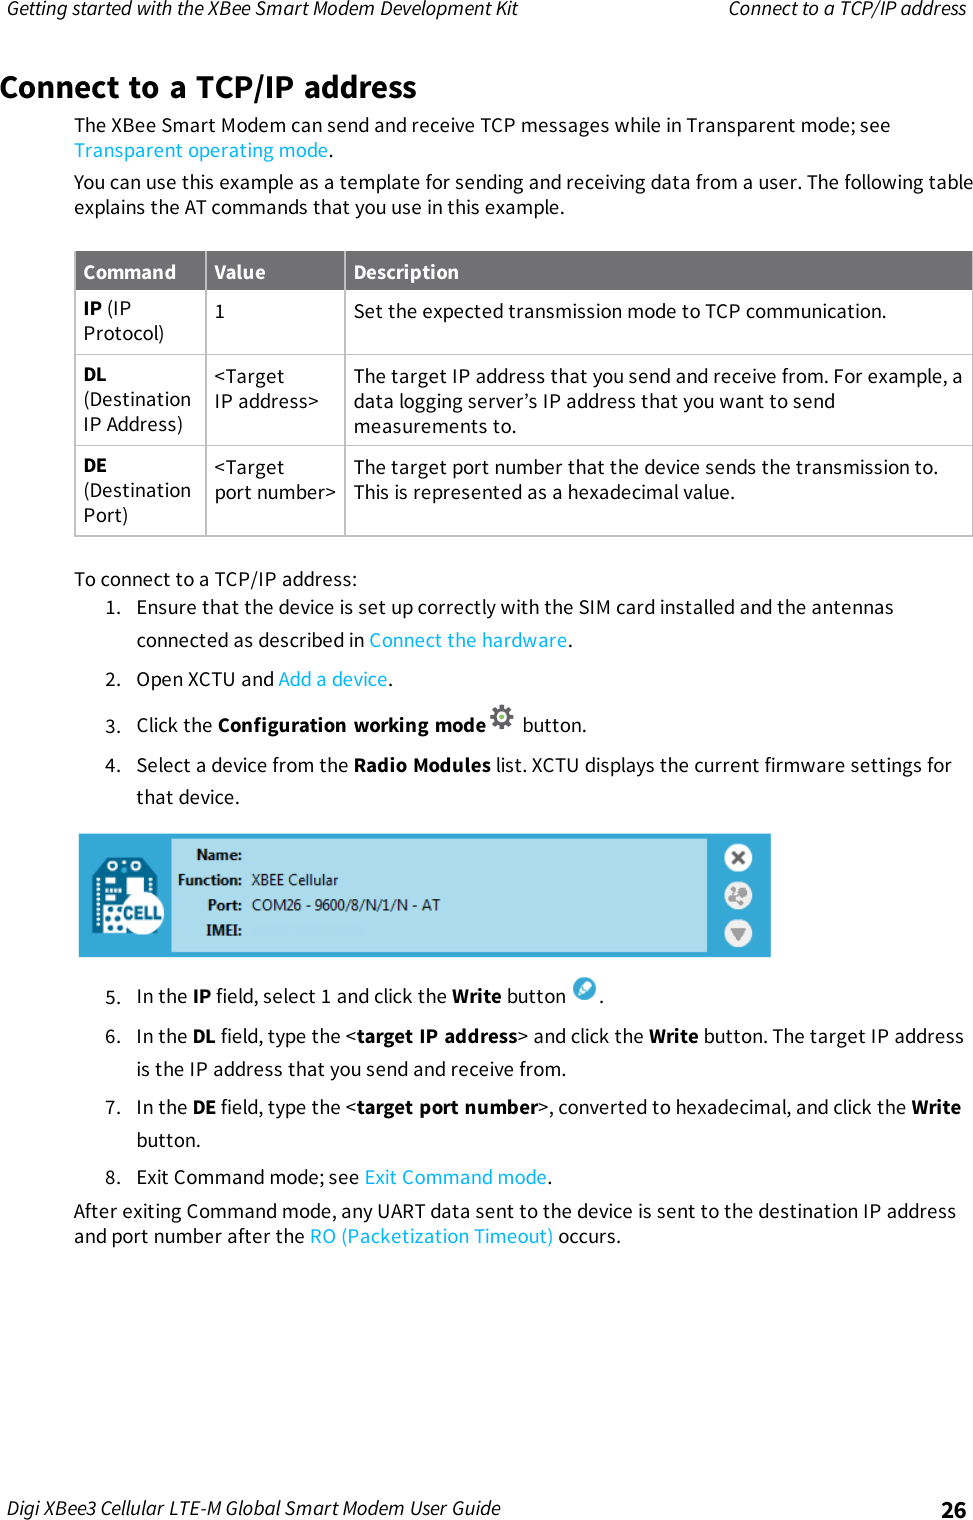 Page 26 of Digi XB3M1 XBee3 Cellular LTE-M User Manual 